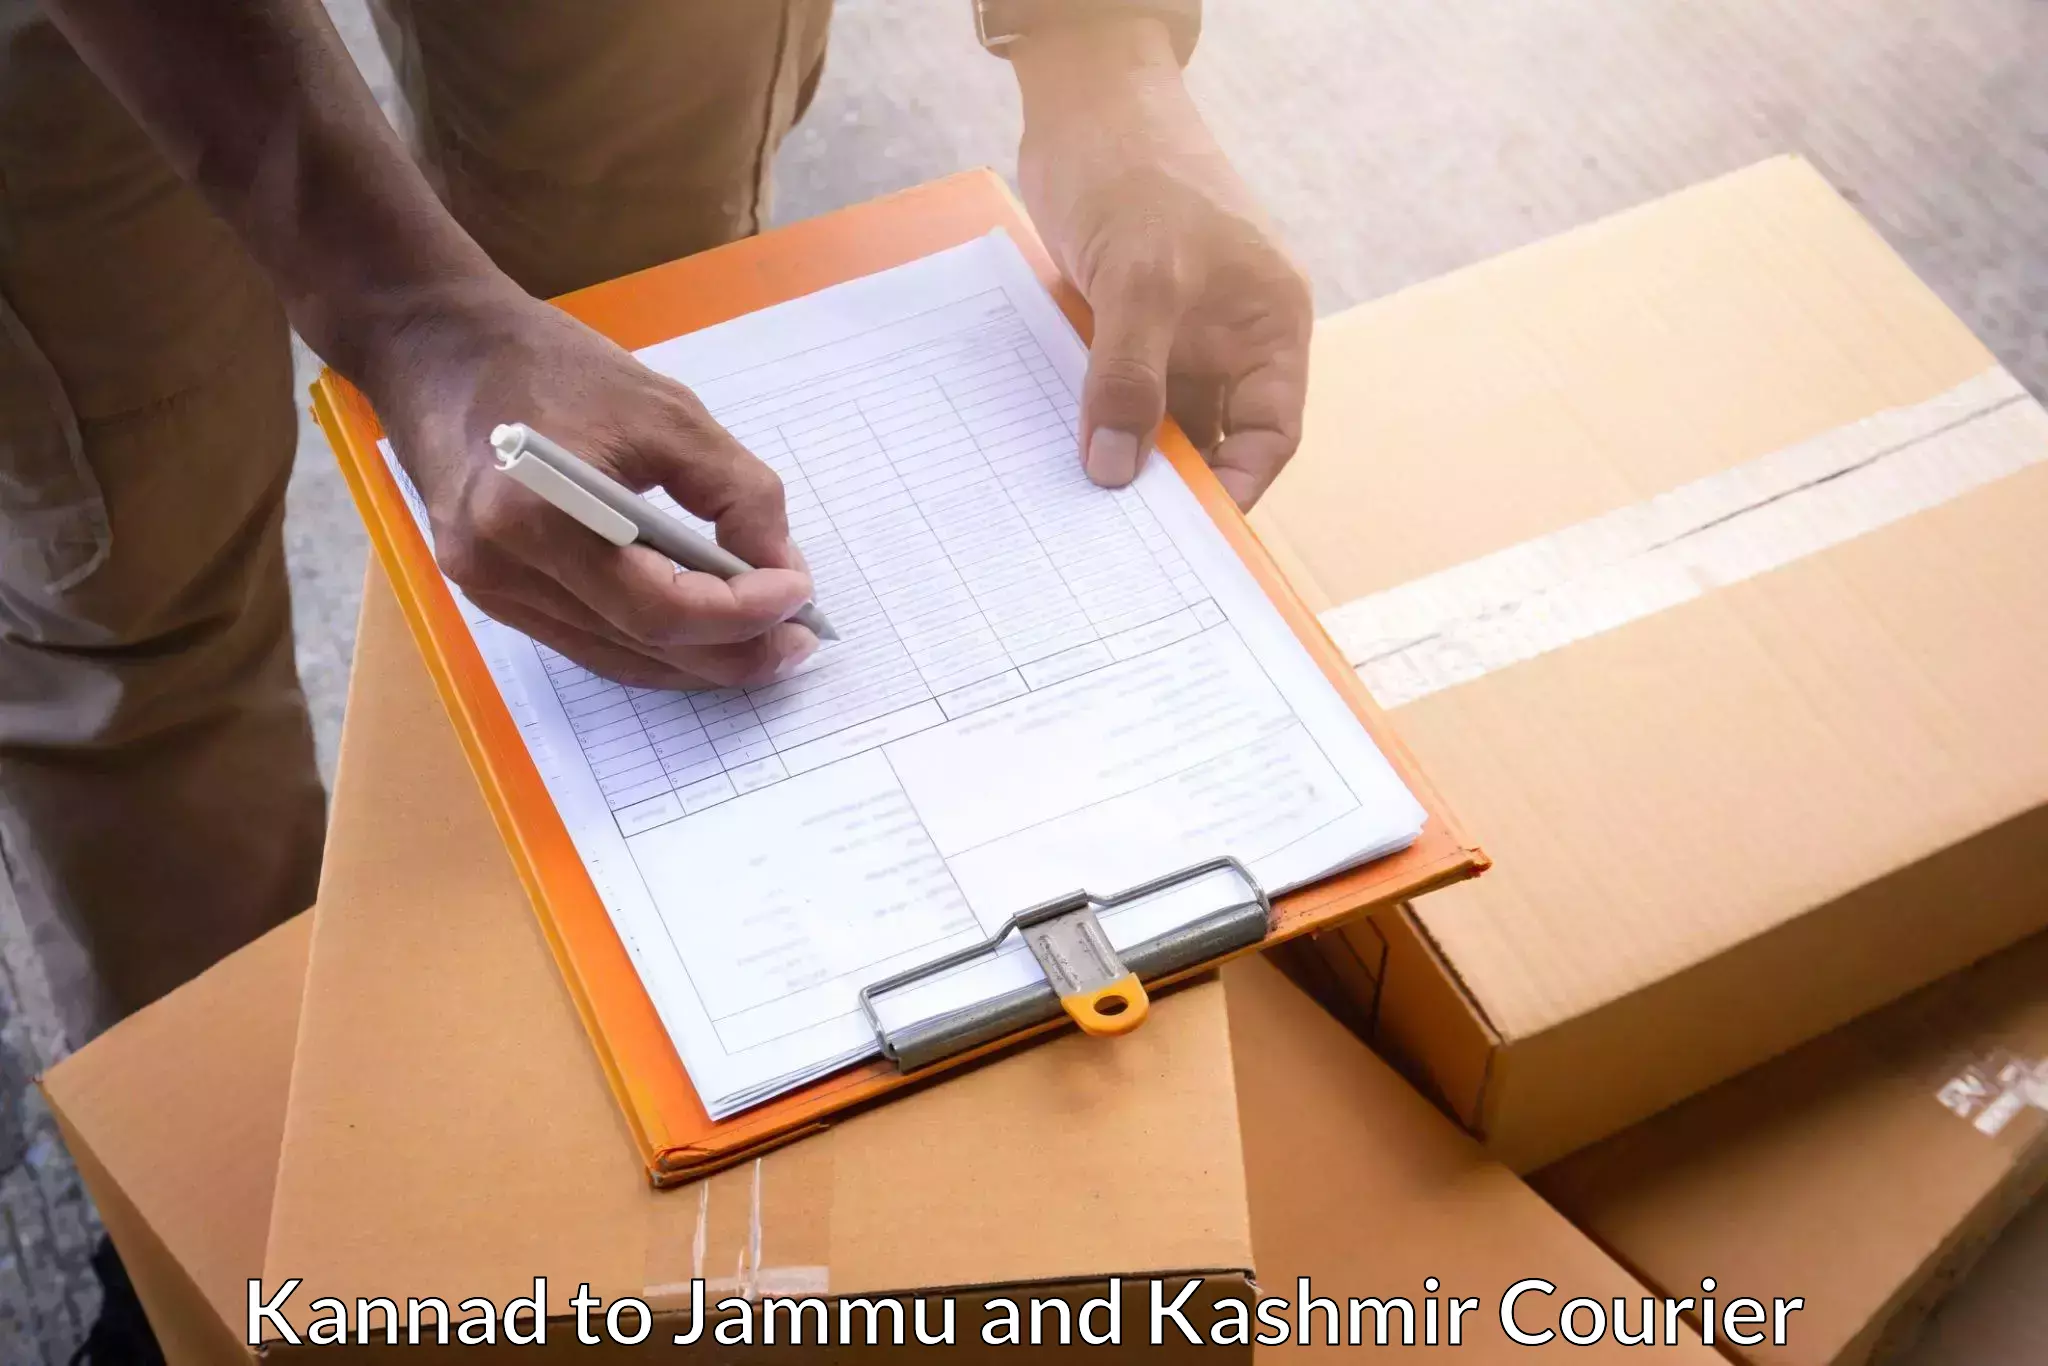 Reliable delivery network Kannad to Jammu